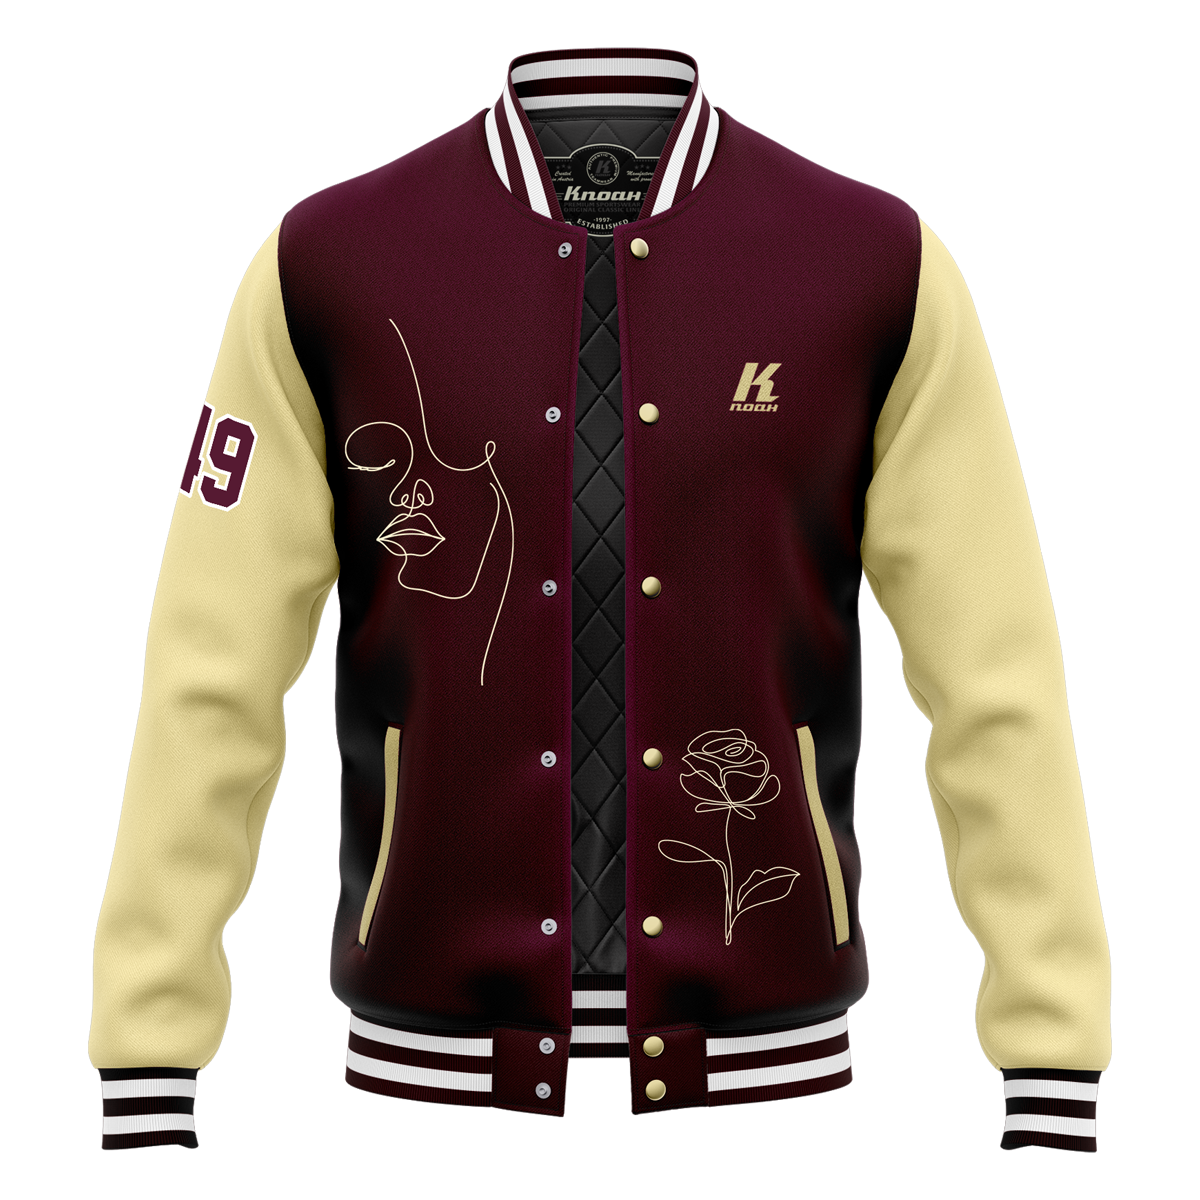 Day 12: "Sleek" Authentic Varsity Jacket with Playernumber/Initials